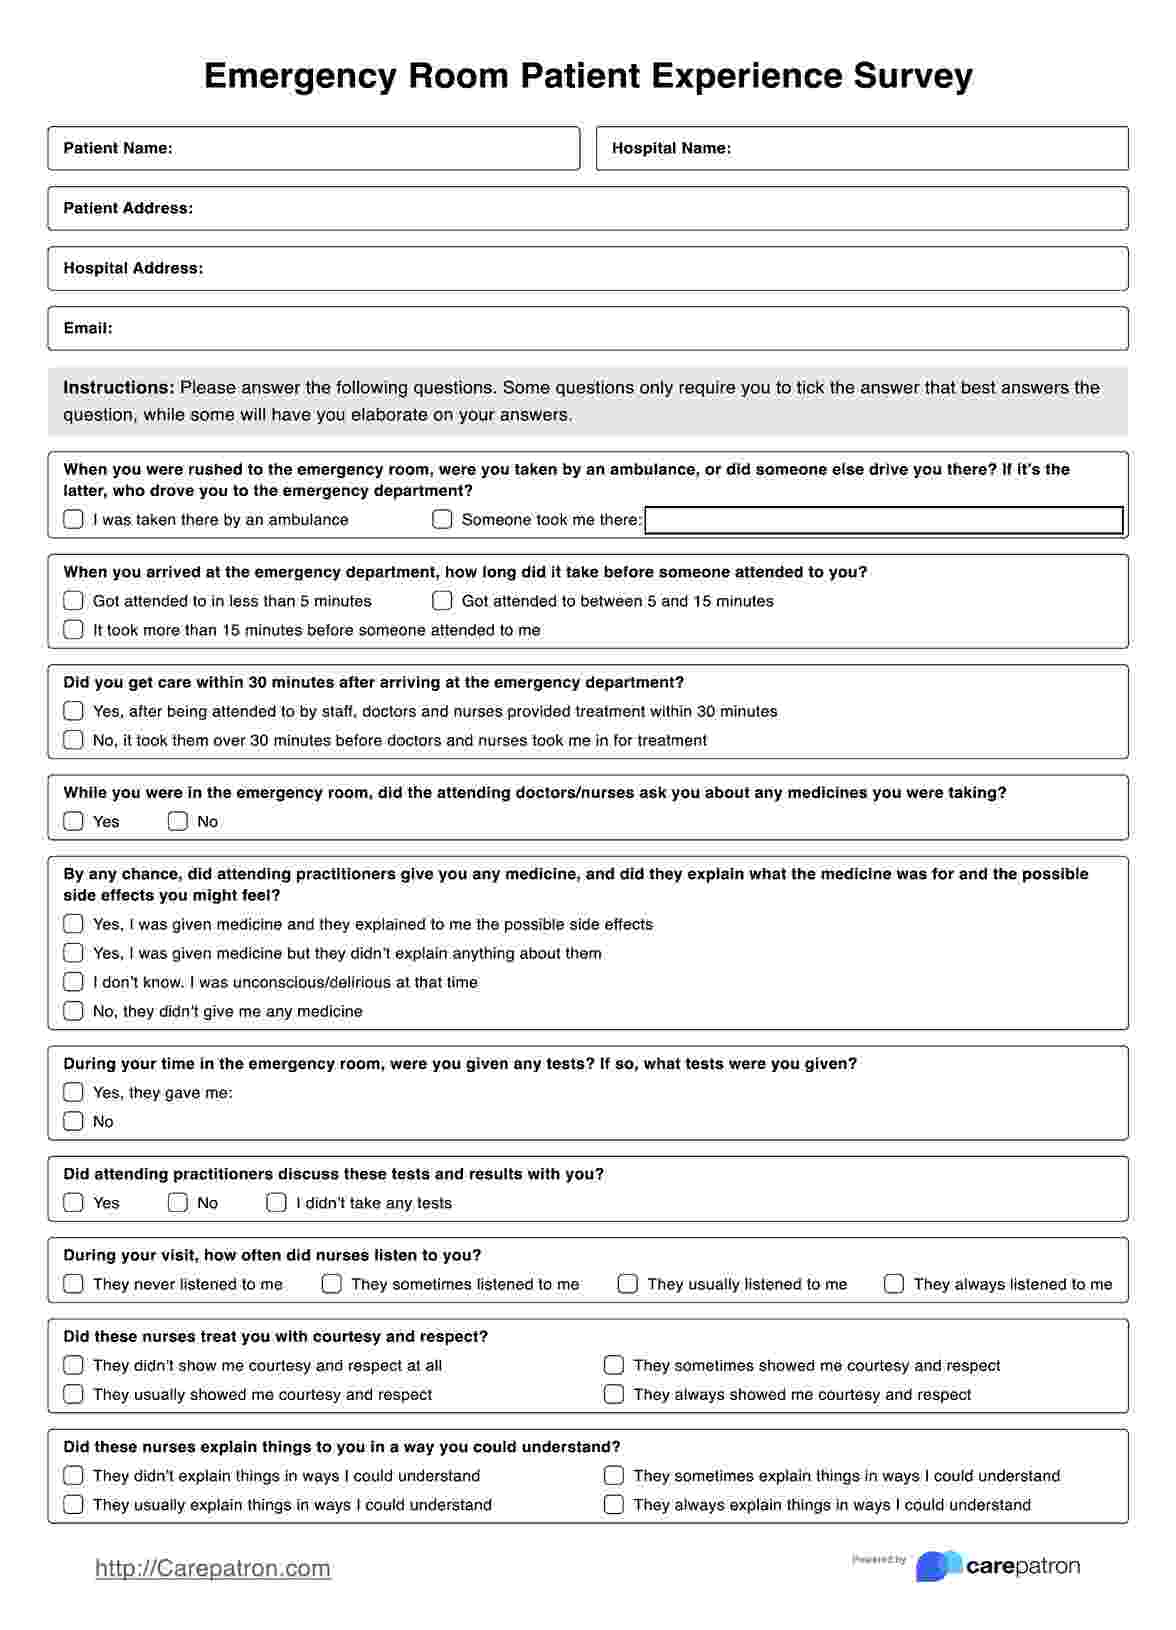 Patient Experience Survey (Emergency Room) PDF Example